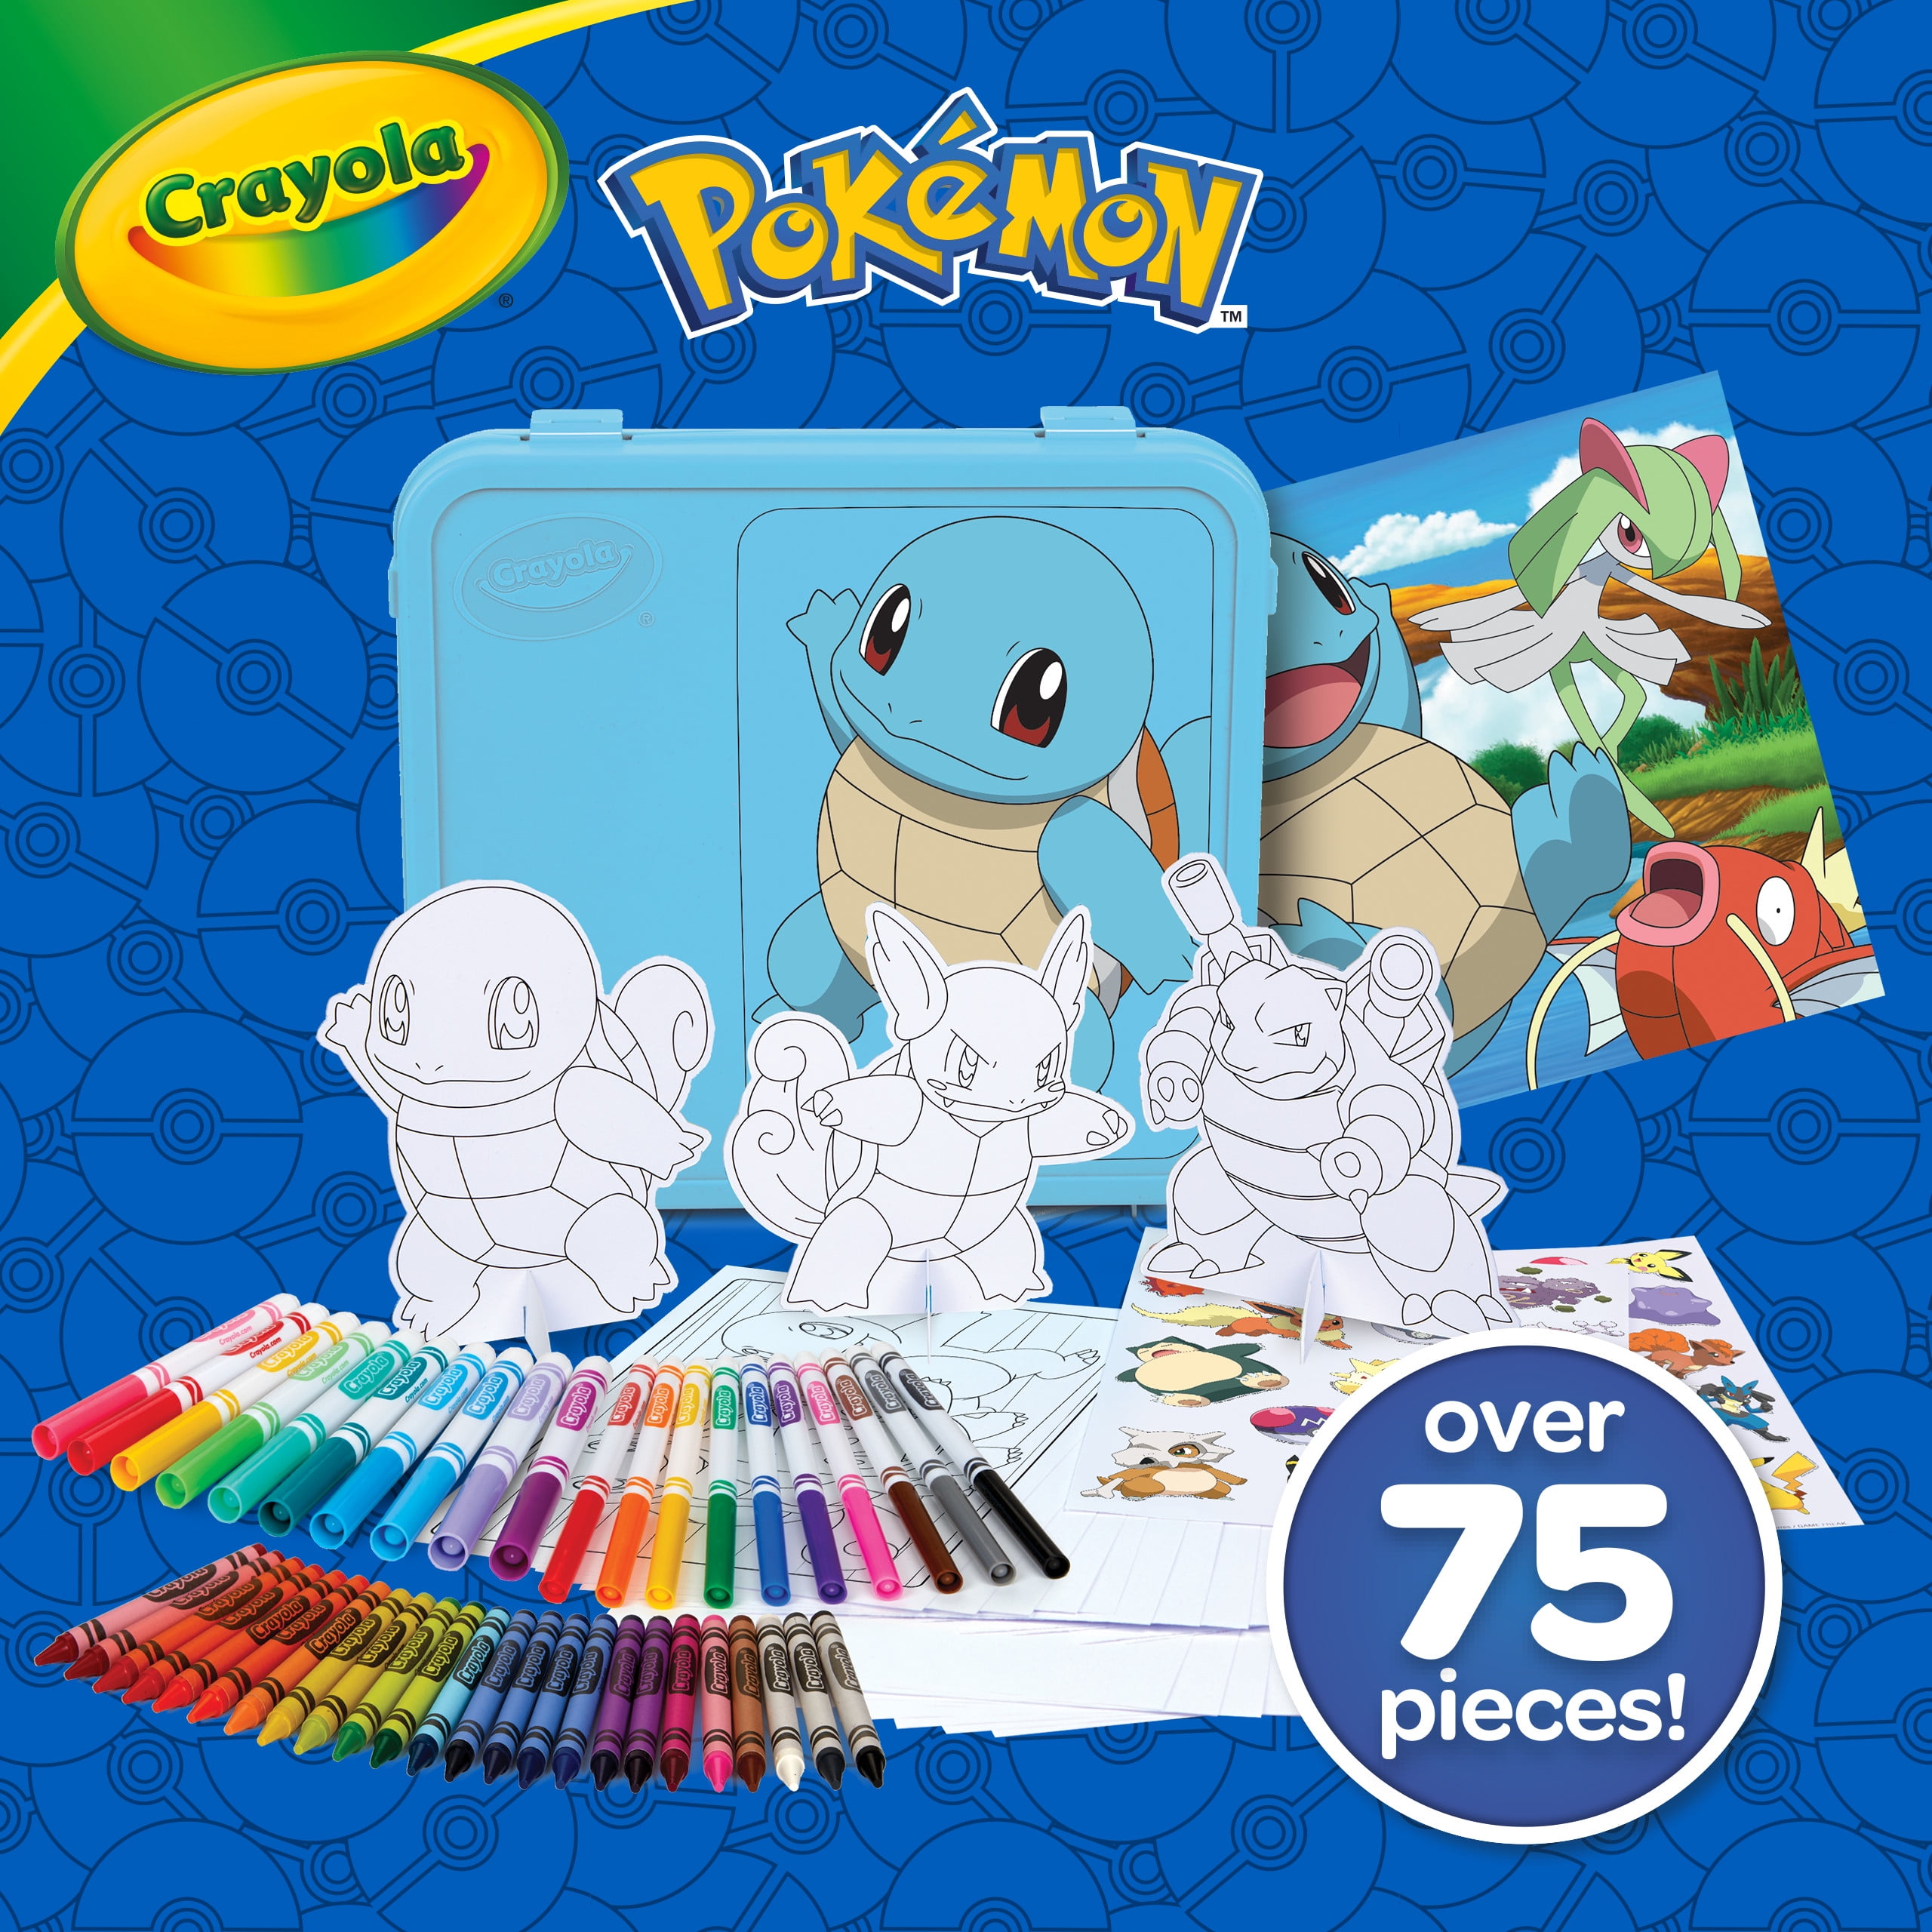 Crayola Pokémon Squirtle Coloring Art Case, 71+ pcs., Coloring Pages and  Markers, Gift For Kids, Beginner Child 